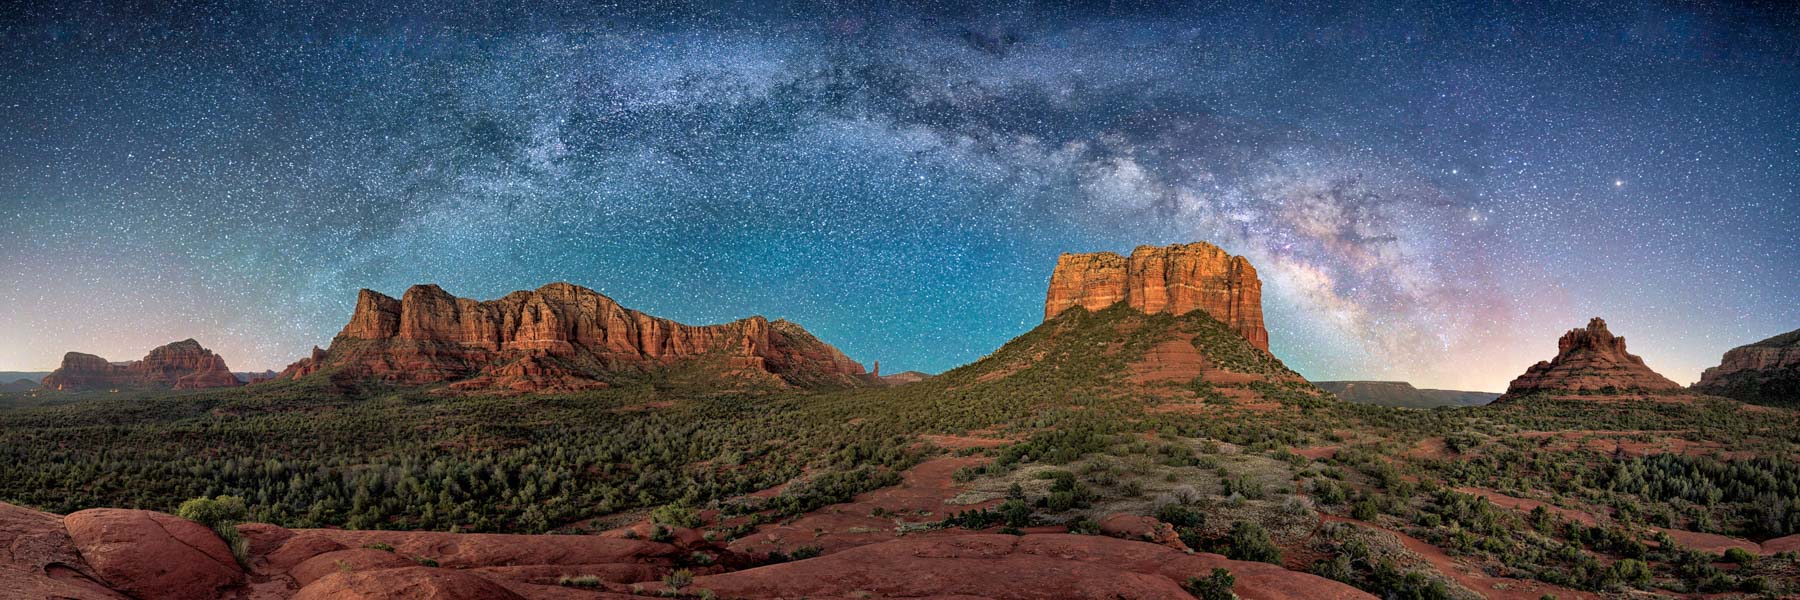 Panorama of the Milky Way over Courthouse Butte and Bell Rock